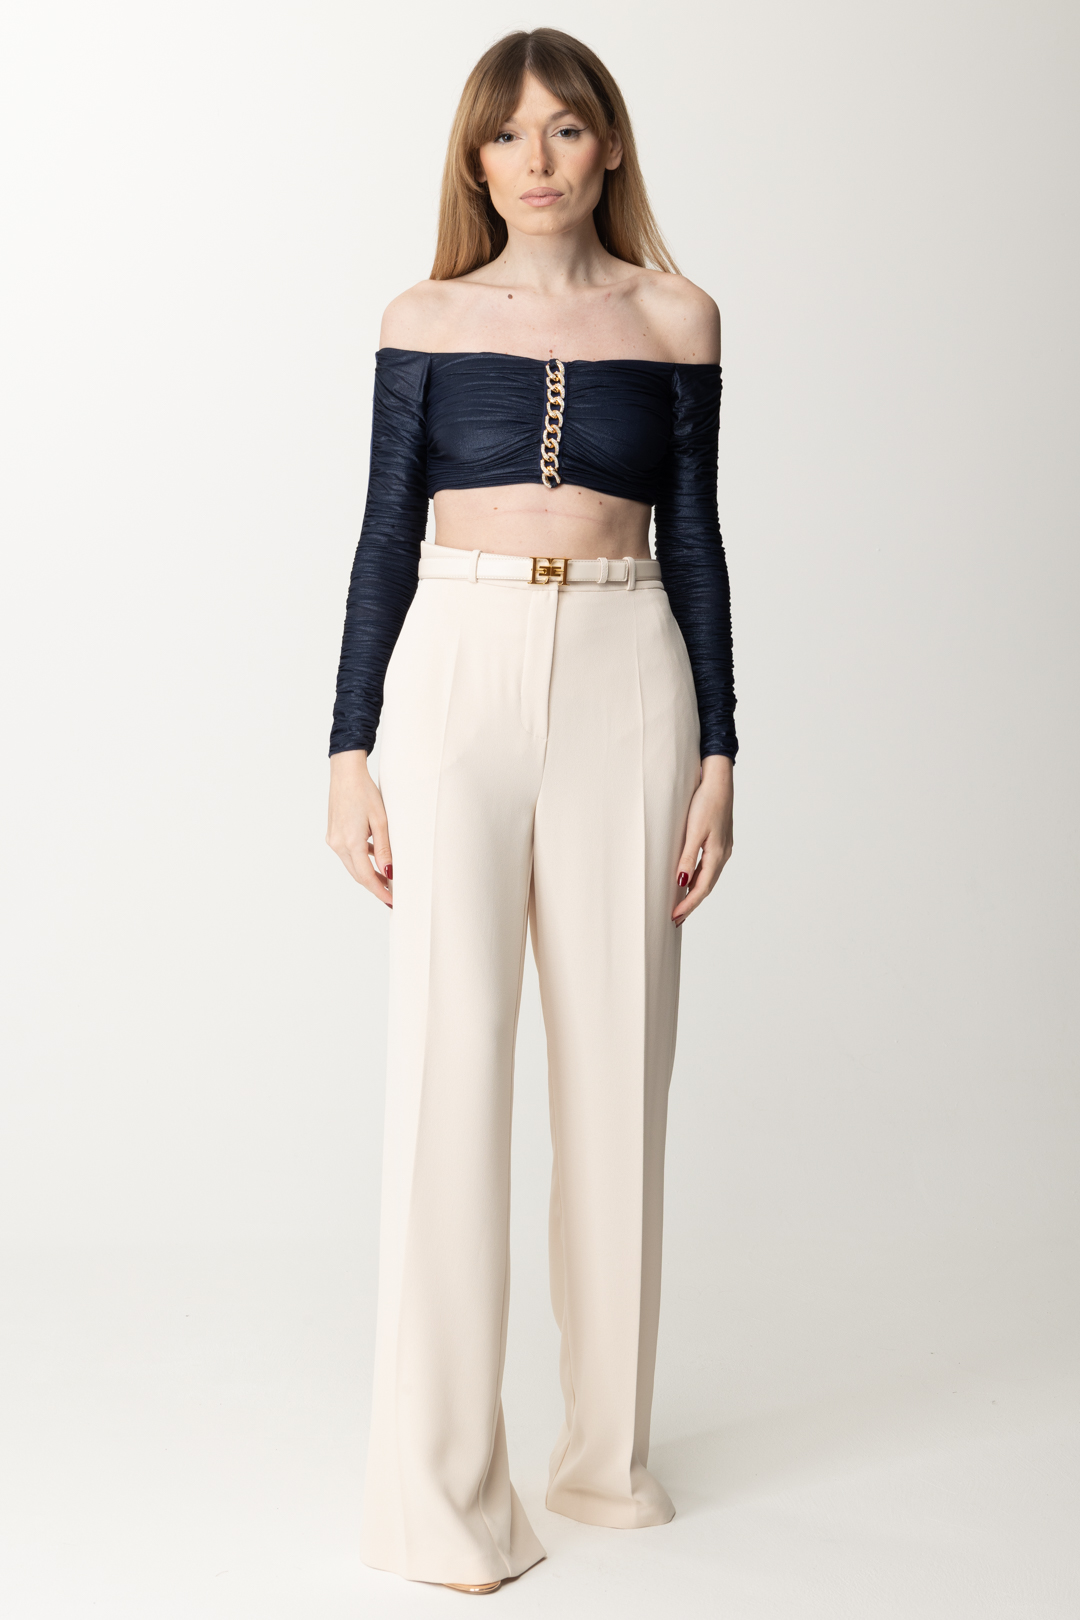 Preview: Elisabetta Franchi Laminated jersey crop top with chain Inchiostro